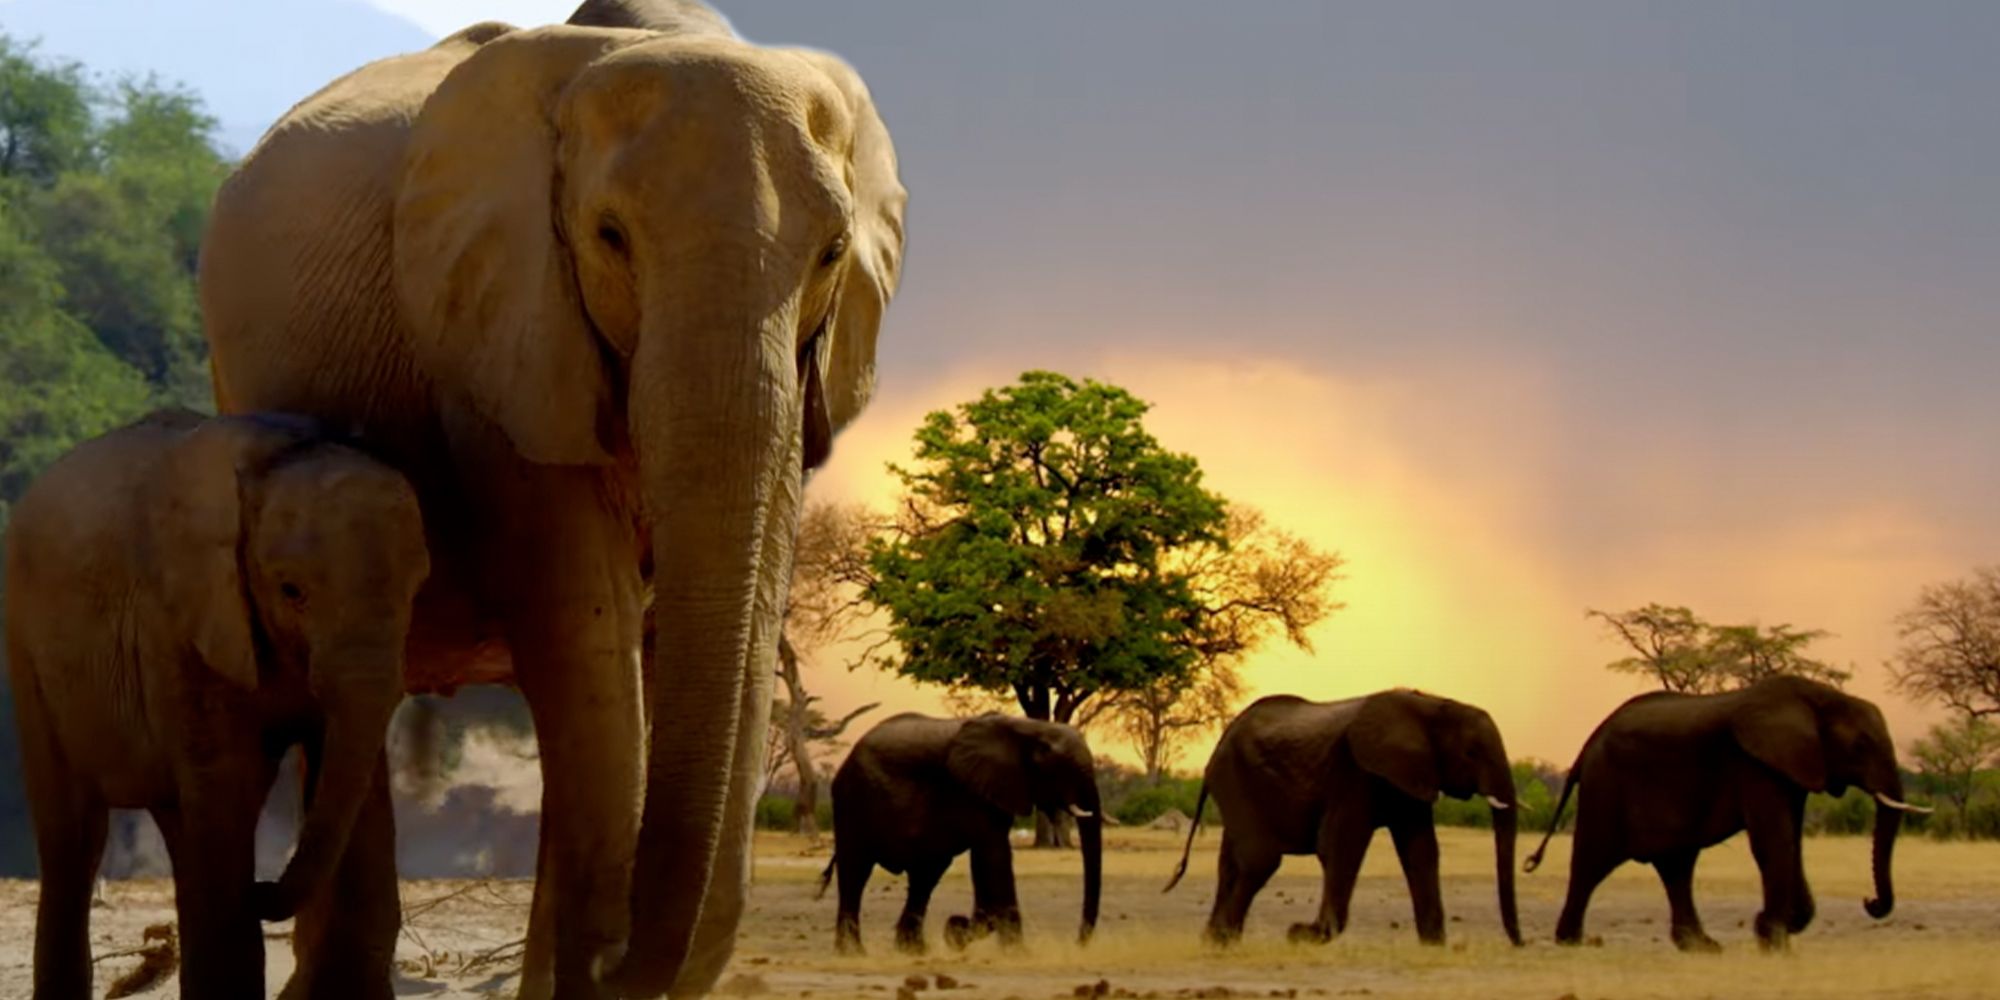 National Geographic Secrets of the Elephants by James Cameron narrated by Natalie Portman